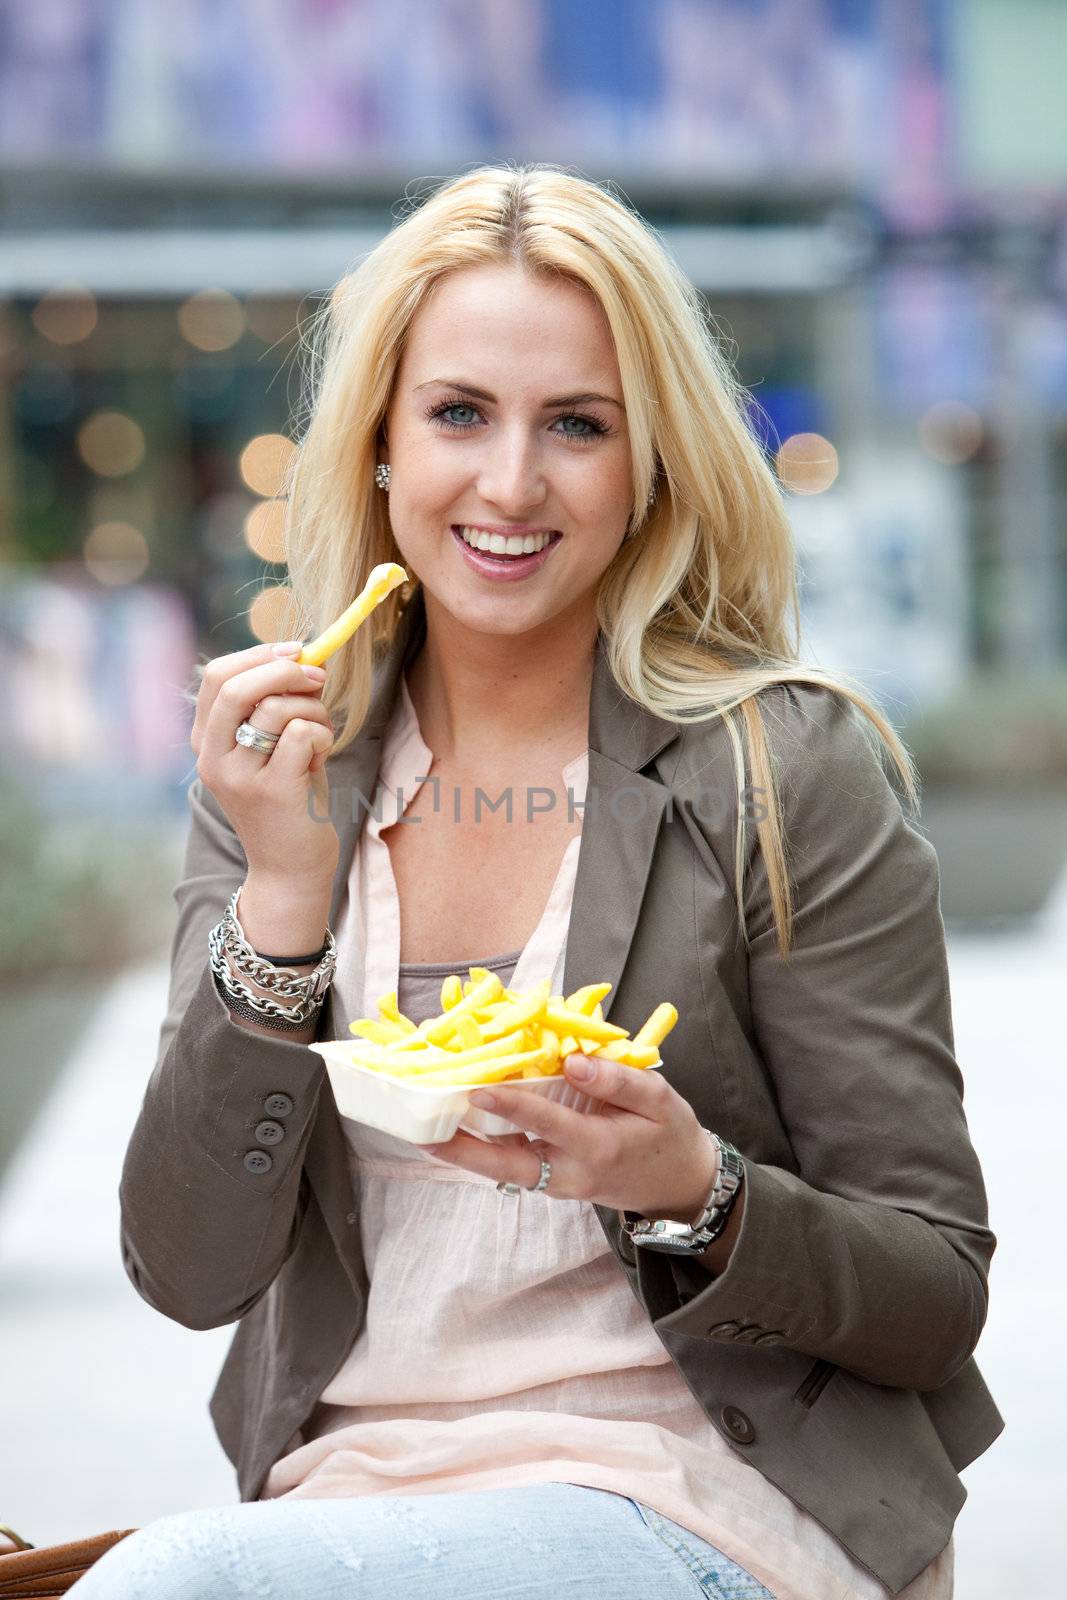 Pretty young girl eating some french fries with mayonaise